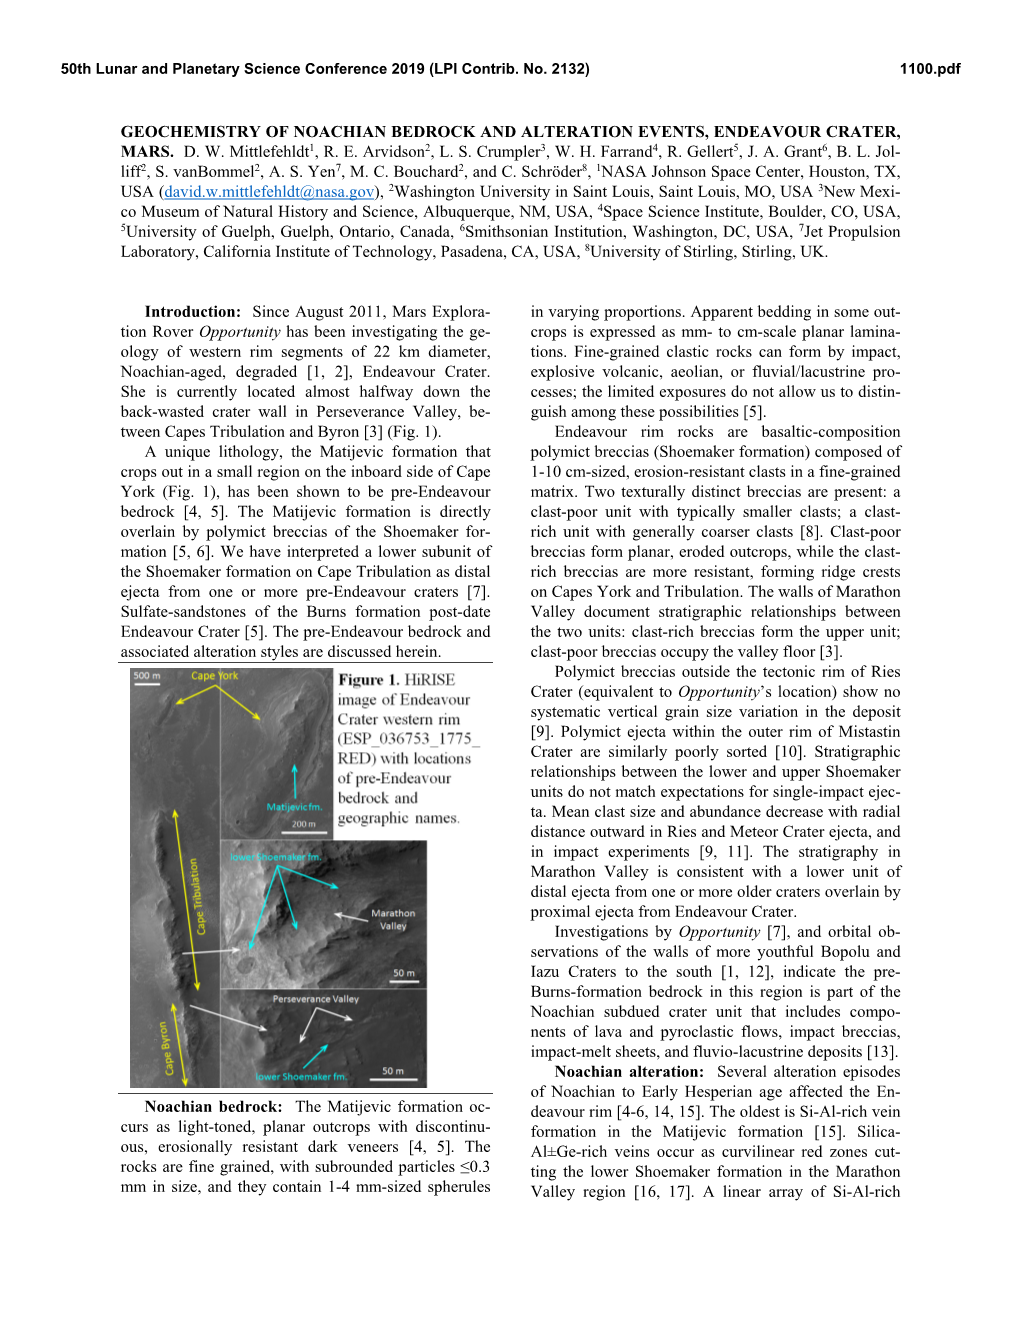 Geochemistry of Noachian Bedrock and Alteration Events, Endeavour Crater, Mars